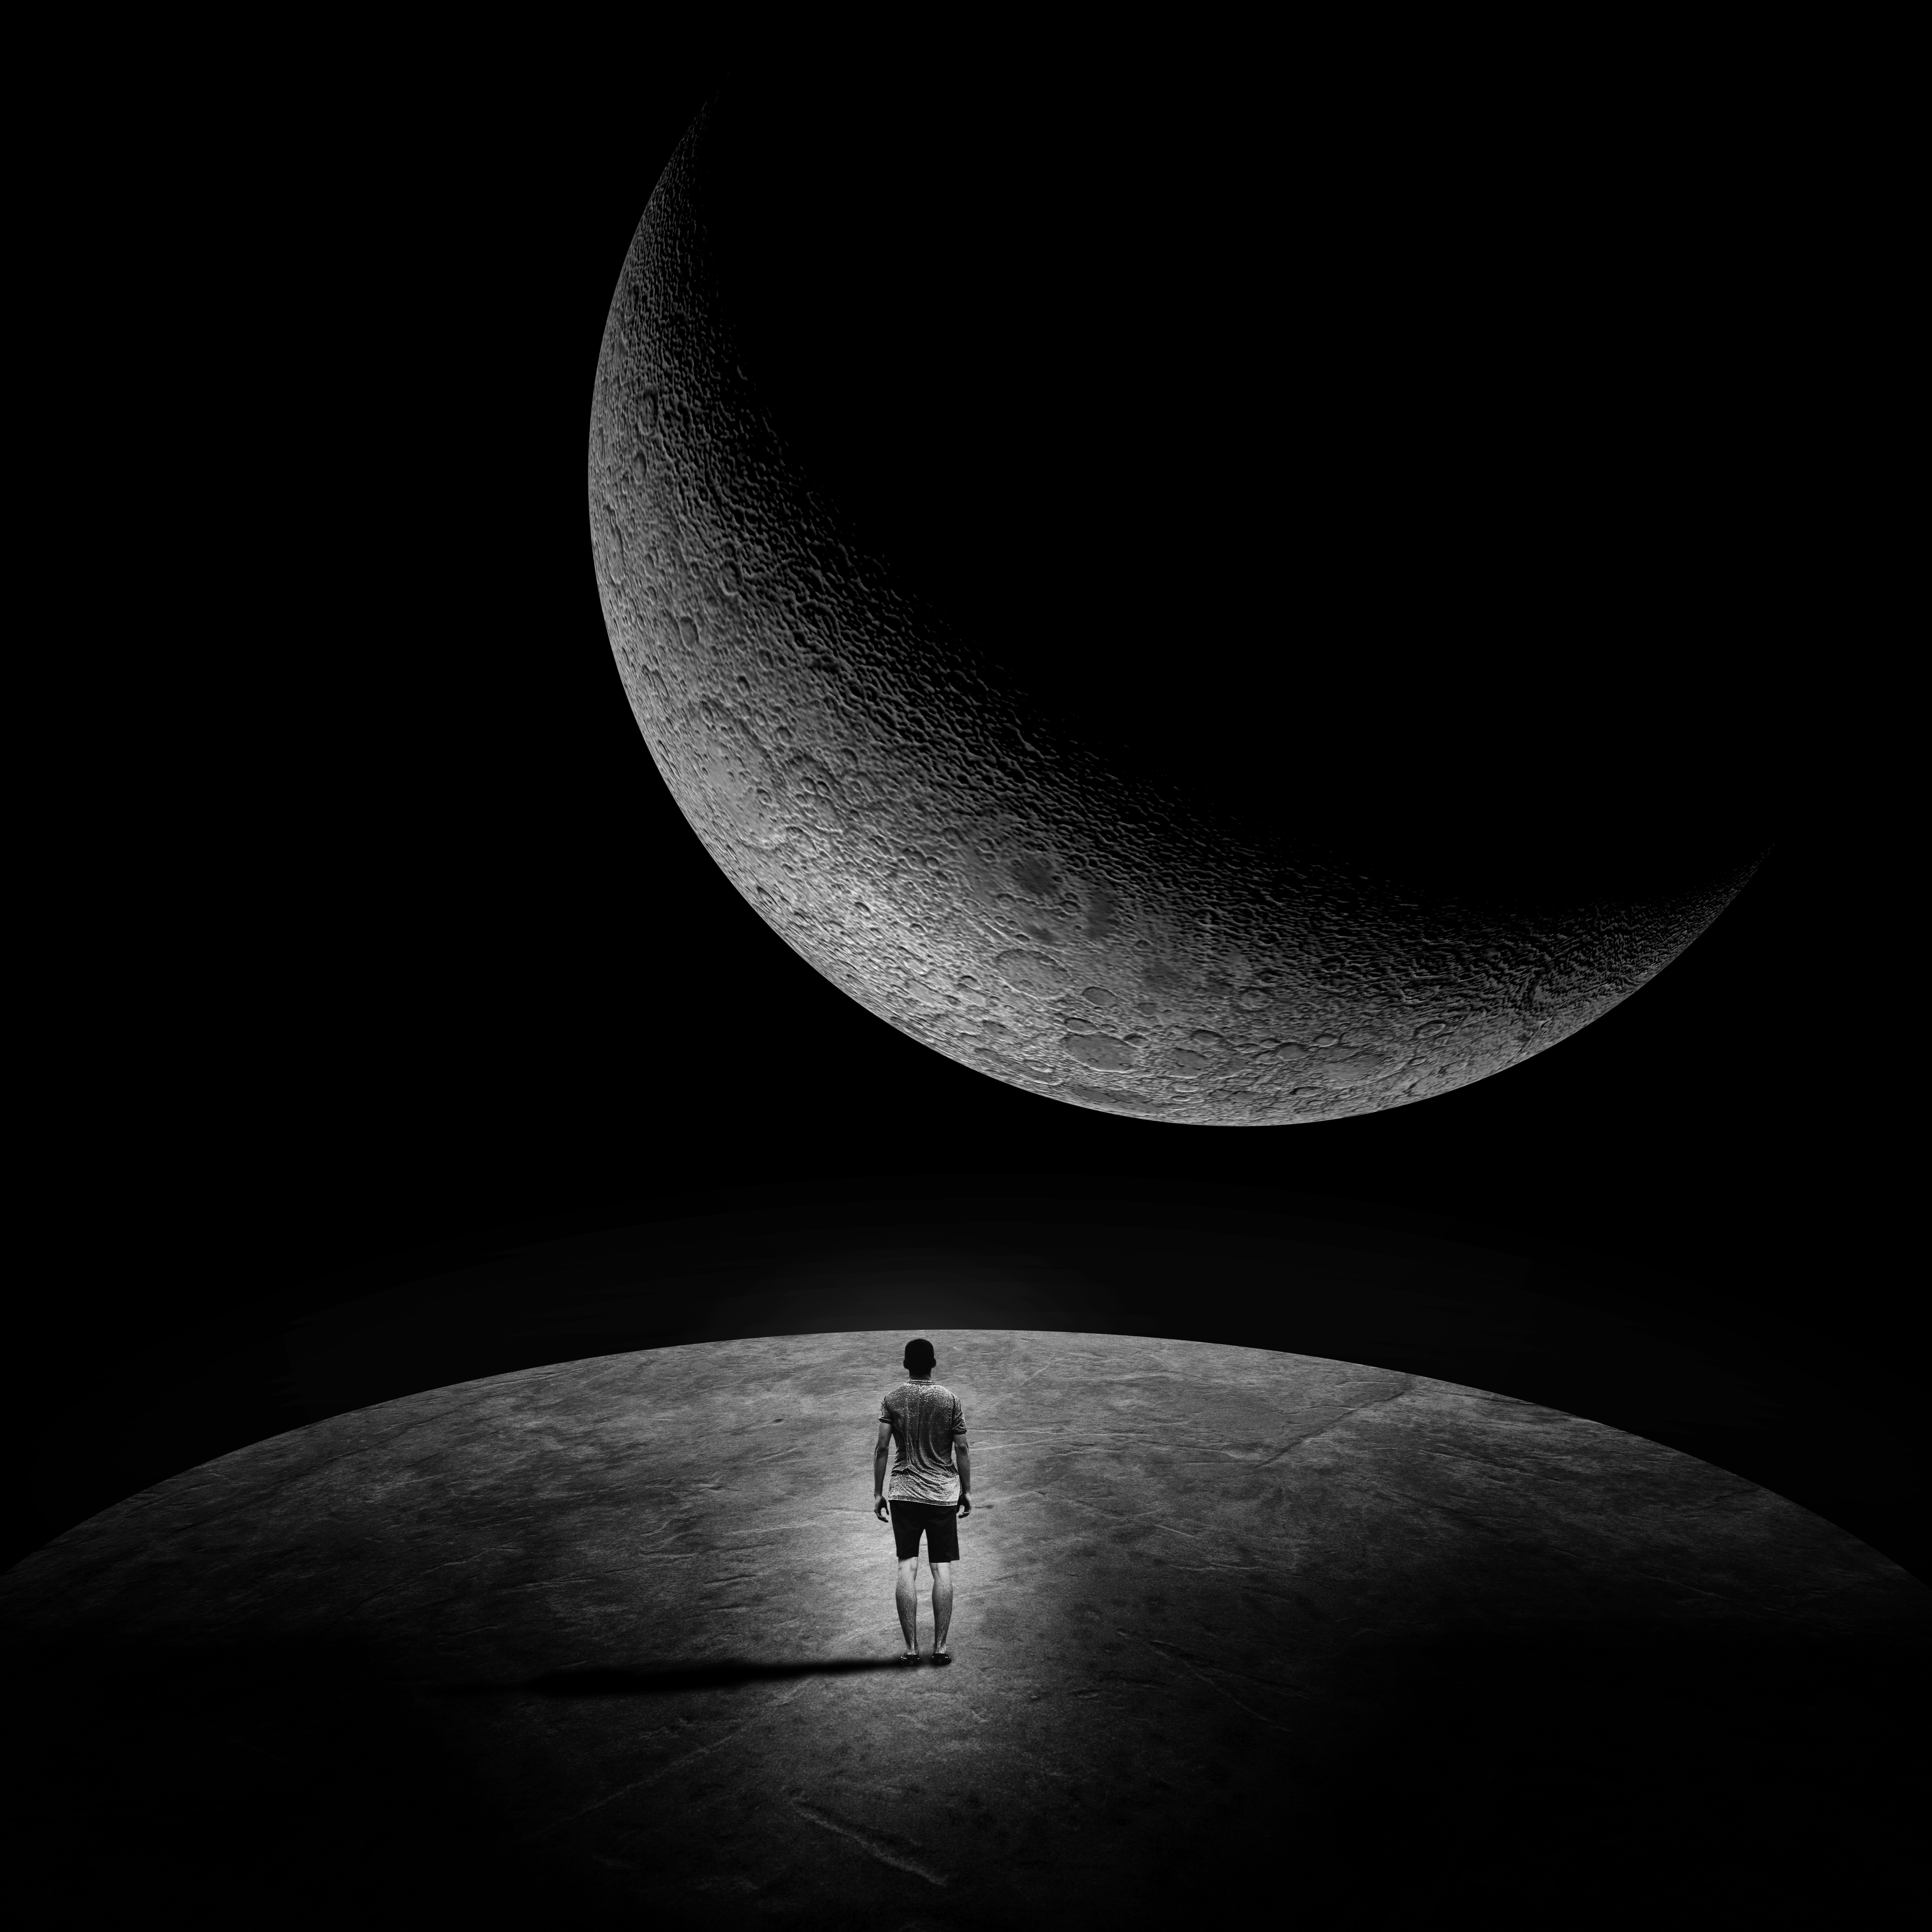 space, black and white, loneliness, moon, human, cosmic, black, dark, extraterrestrial, person